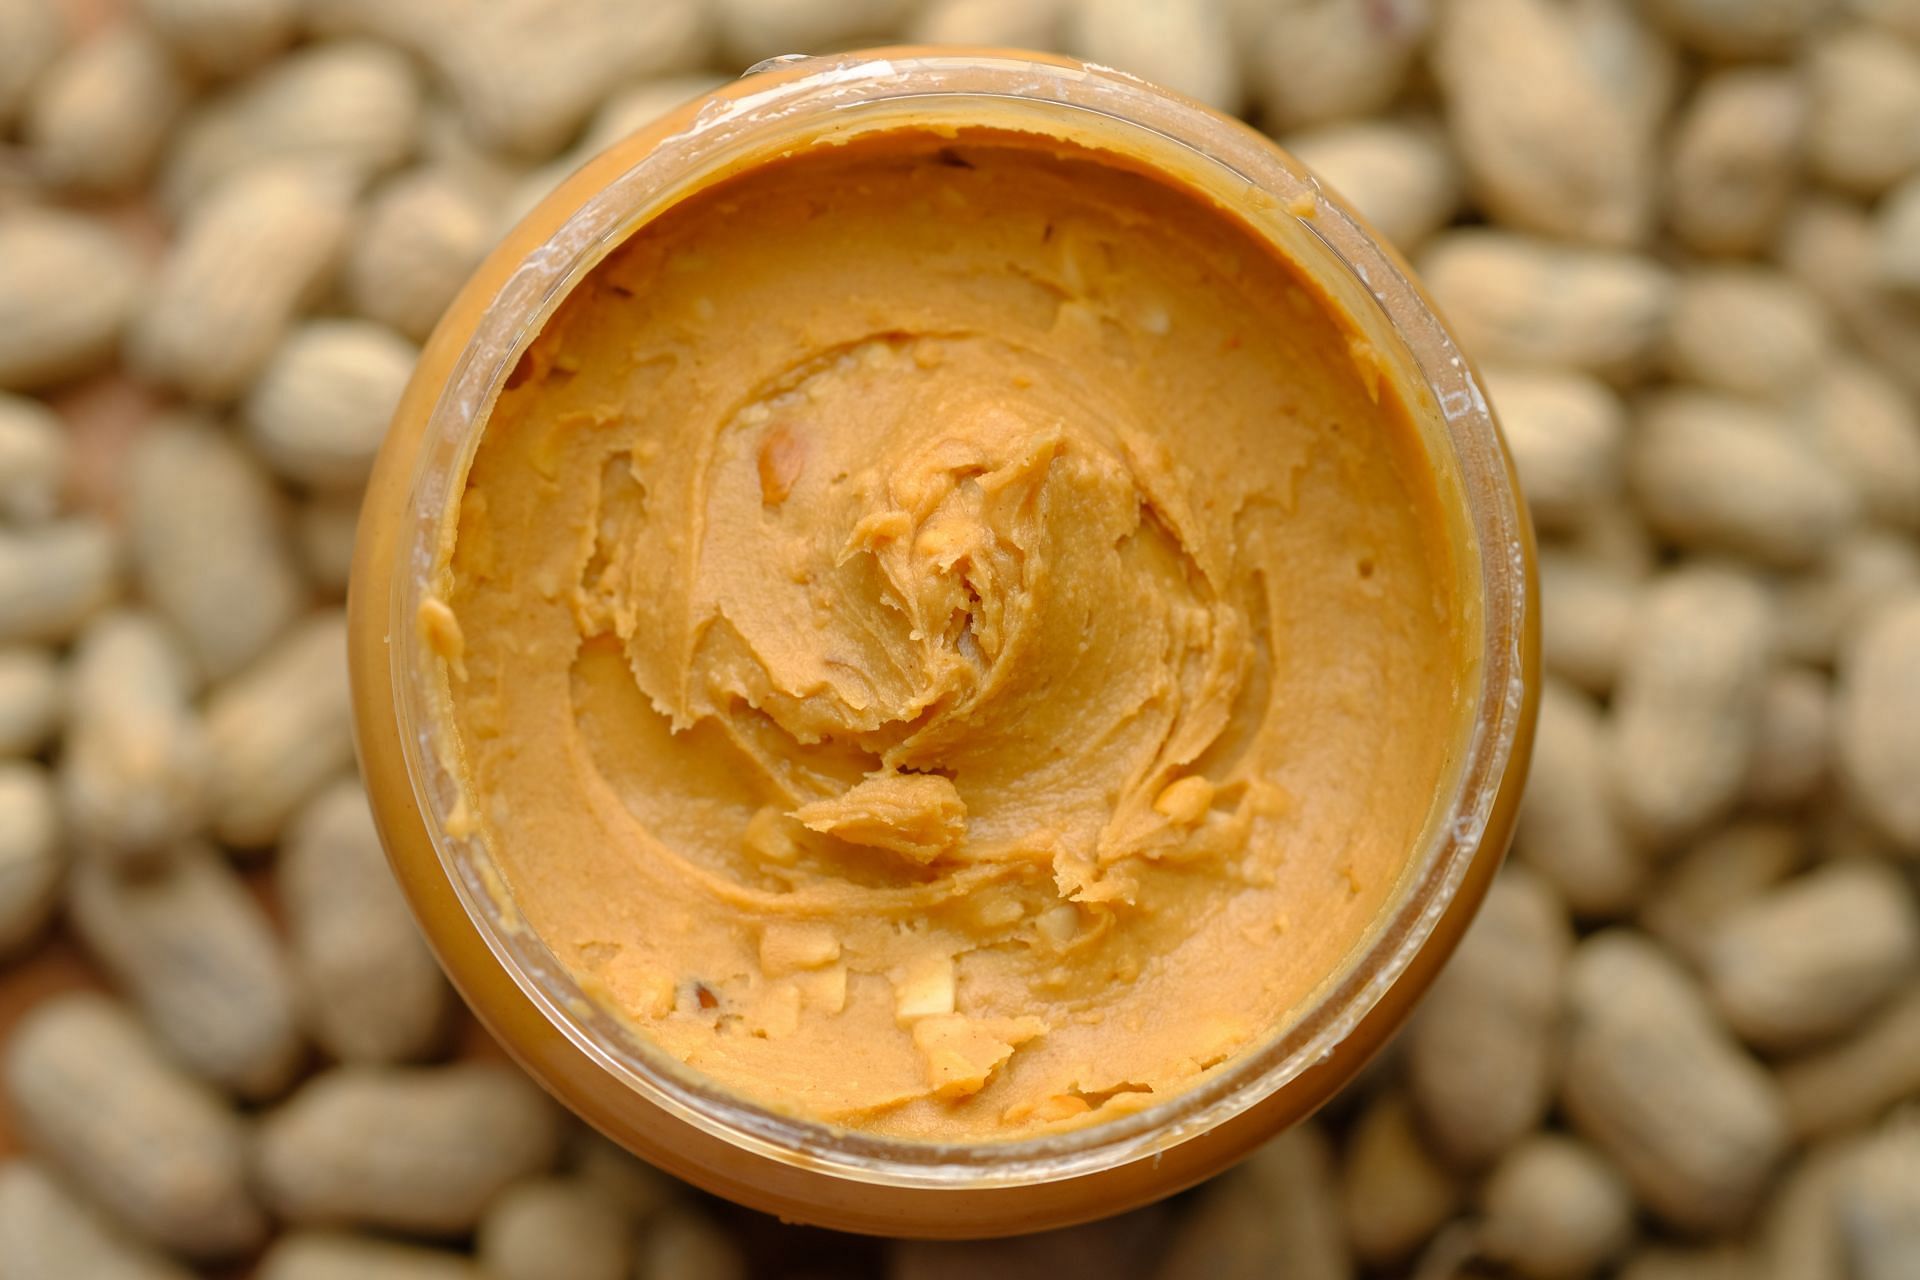 Peanut butter is a good fat as it contains monounsaturated fats. (Image via Unsplash/Towfiqu Barbhuiya)